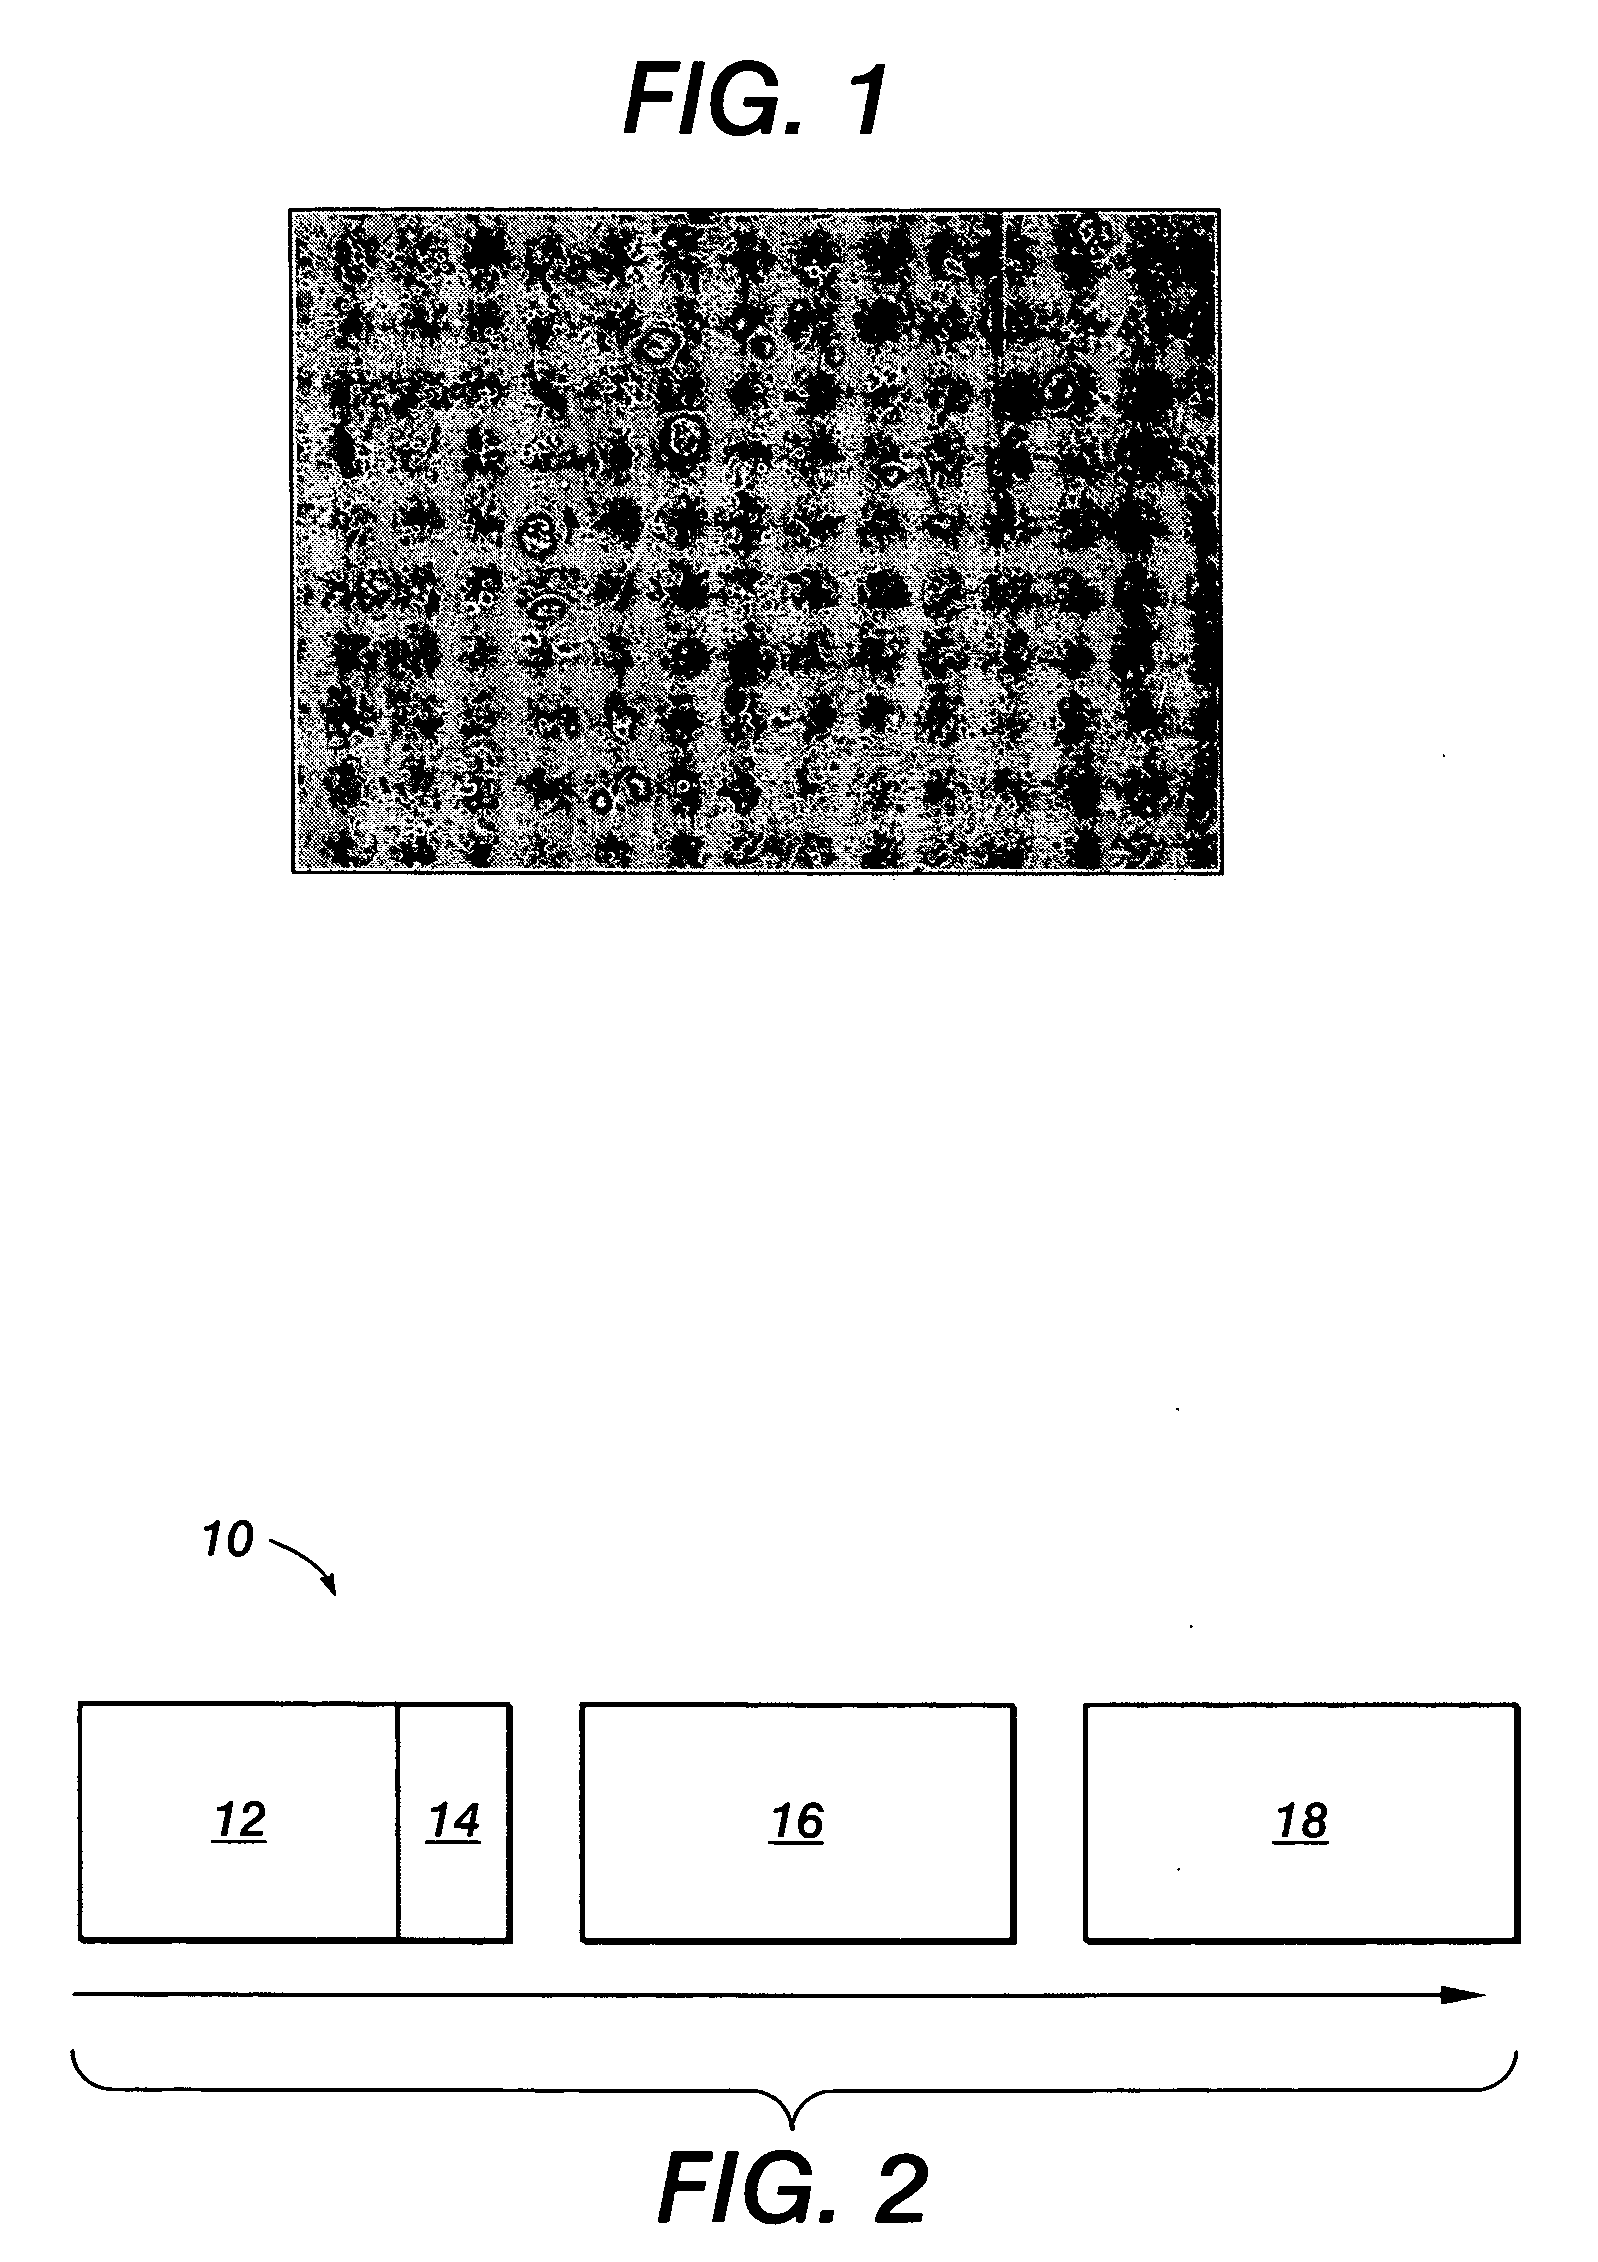 Coated substrates and method of coating